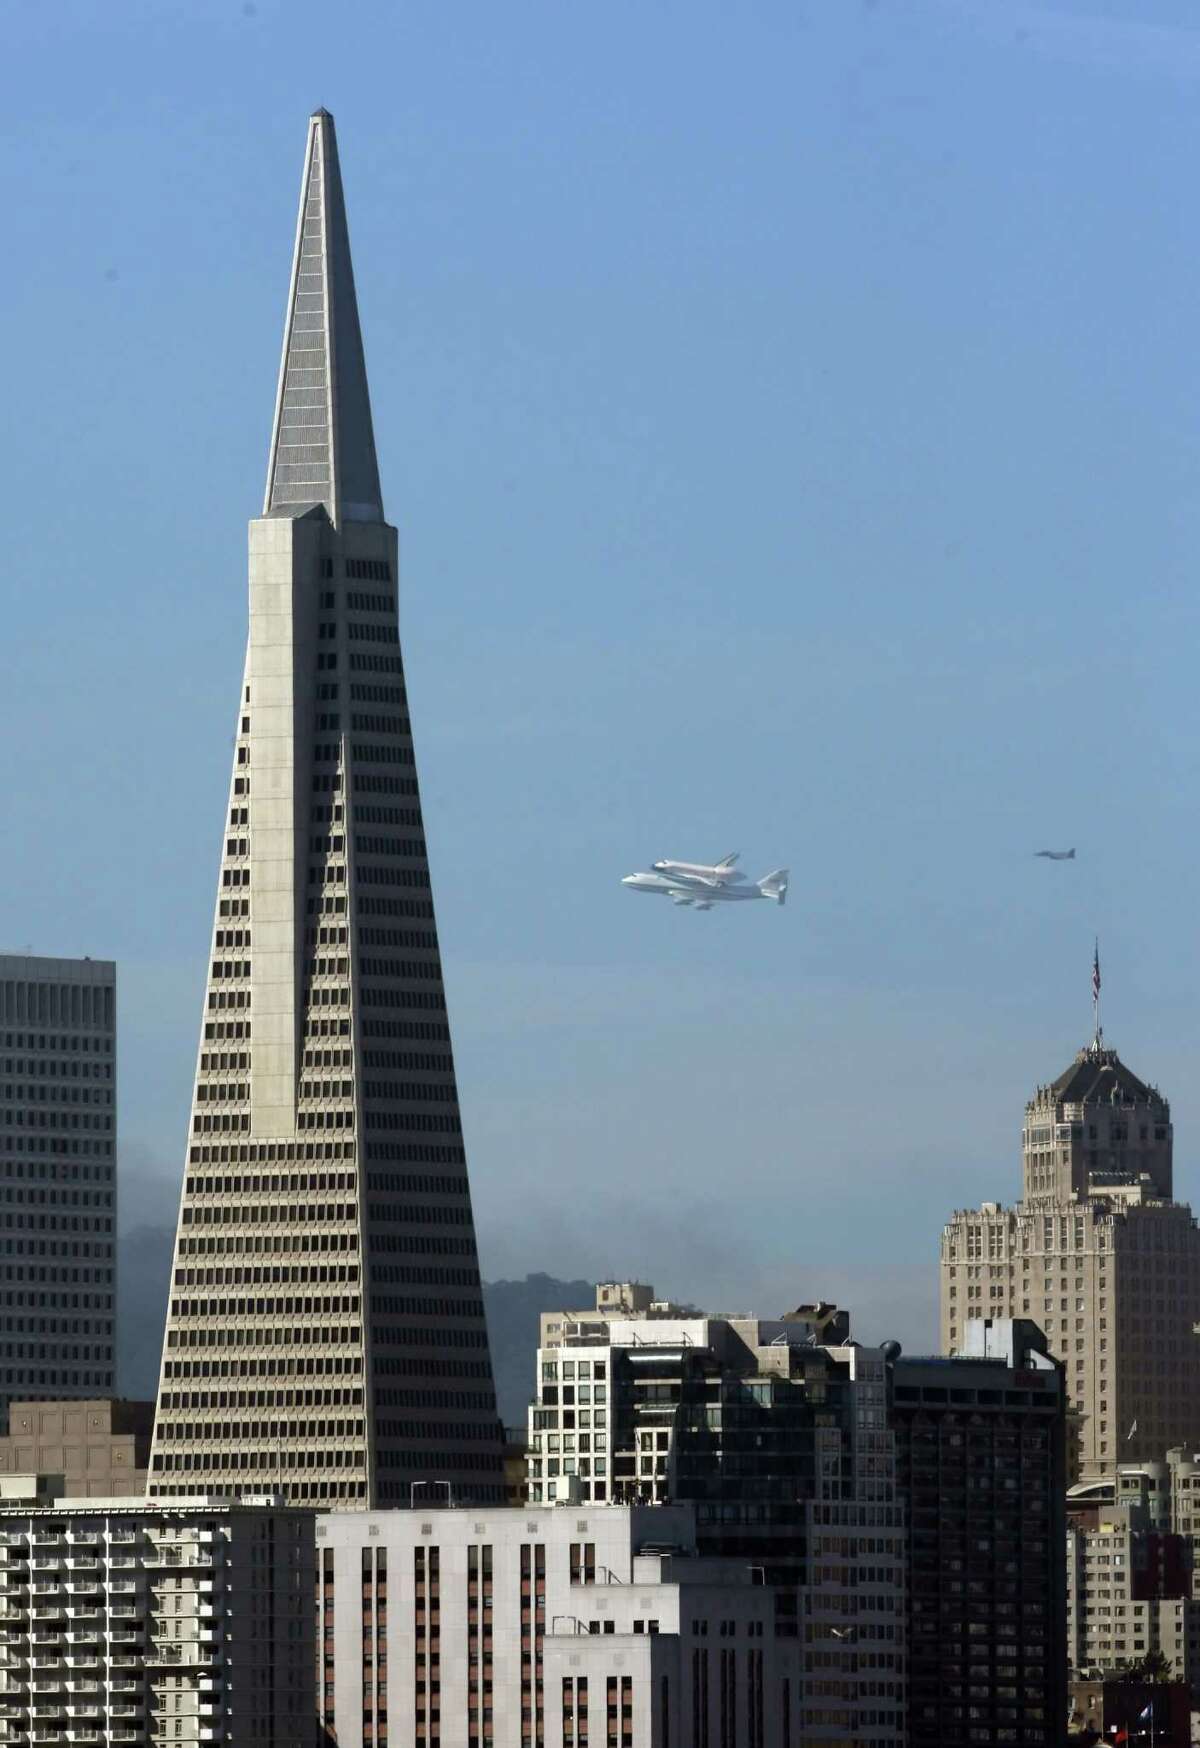 Space Shuttle Endeavour mounted on NASA's Shuttle Carrier Aircraft, flies past Transamerica Pyramid on Friday, Sept. 21, 2012, in San Francisco. Endeavour is making a final trek across the country to the California Science Center in Los Angeles, where it will be permanently displayed.